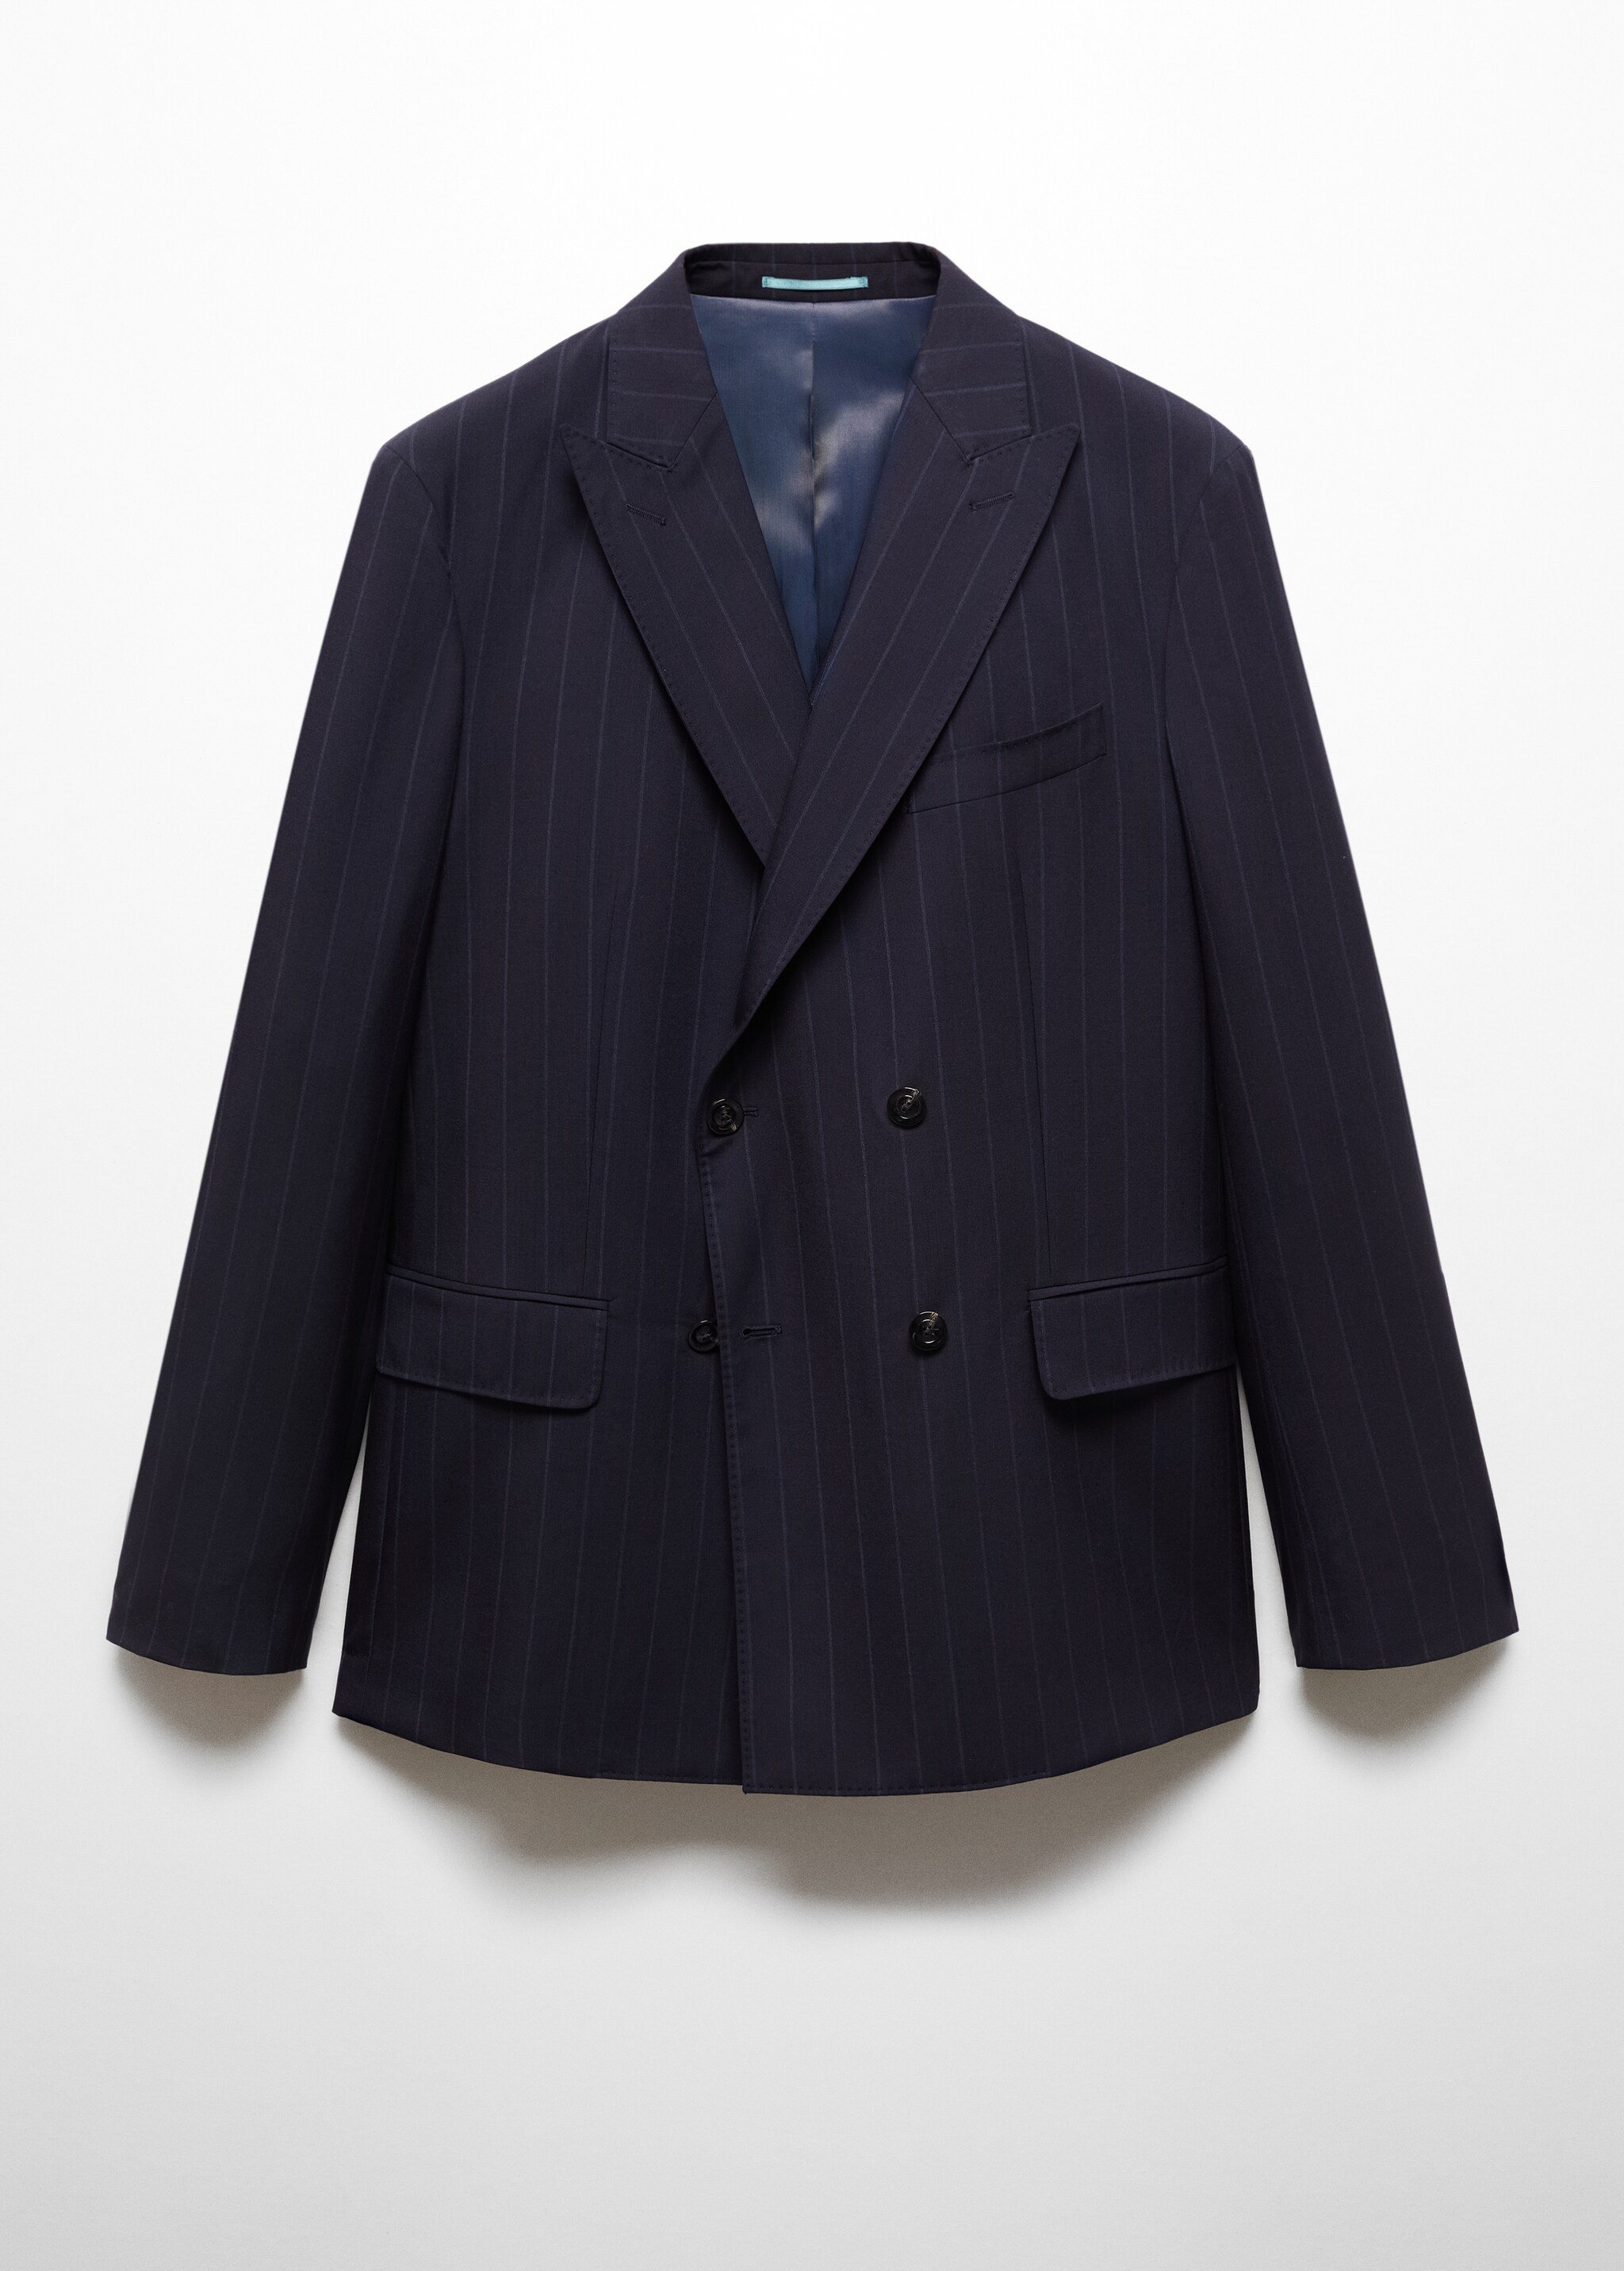 Wool pinstripe double-breasted suit blazer - Article without model